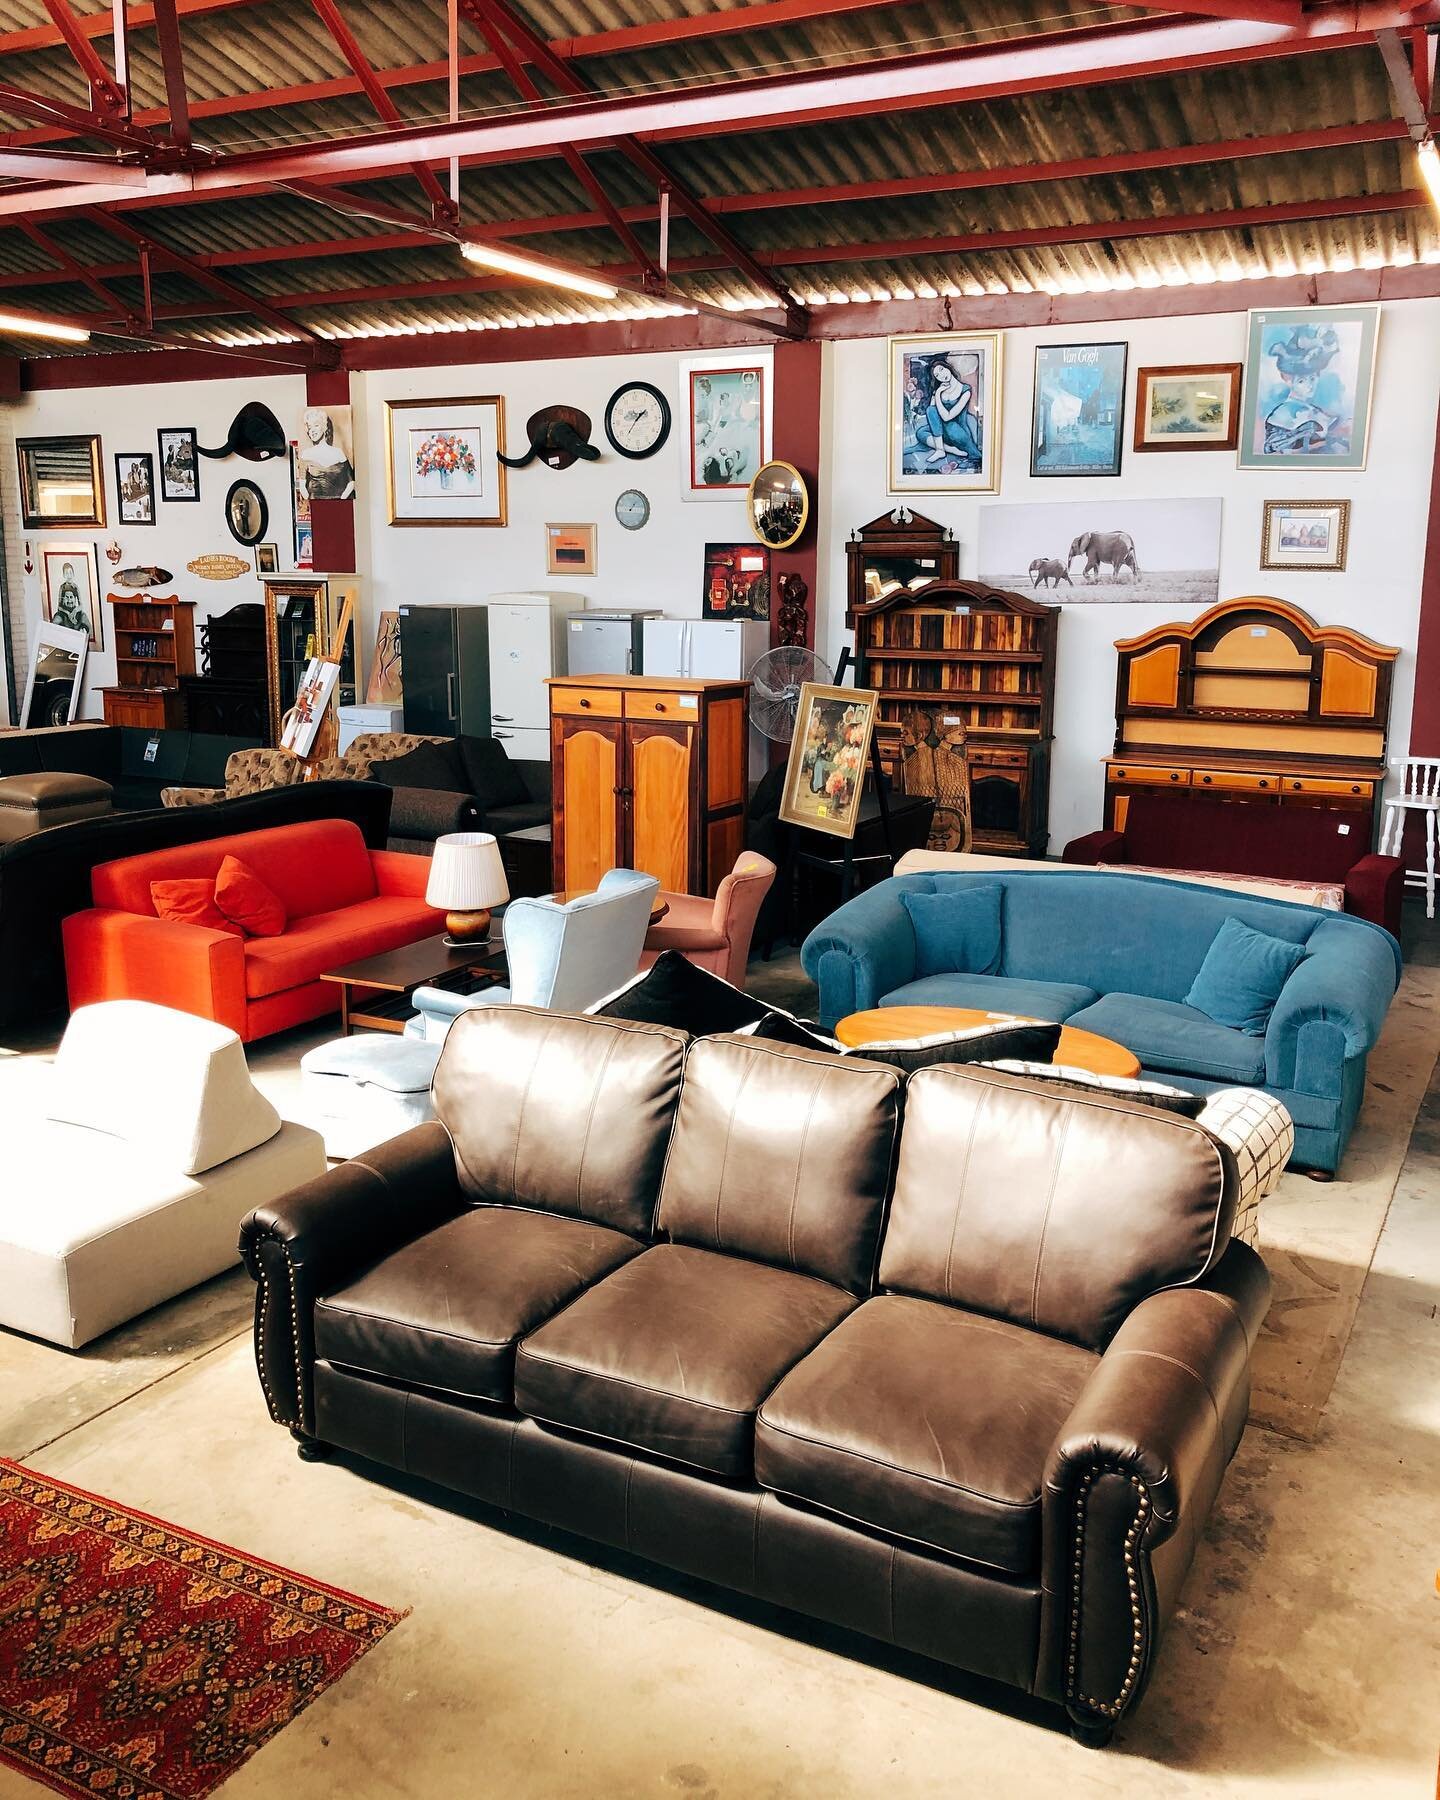 We have a large collection of two seater couches available at the shop. Stop by this weekend to find your new favourite seat 😁 We&rsquo;re open until 1pm on Saturdays and 5pm in the week. This Monday 22 March we&rsquo;ll be open from 9am - 12pm.

De